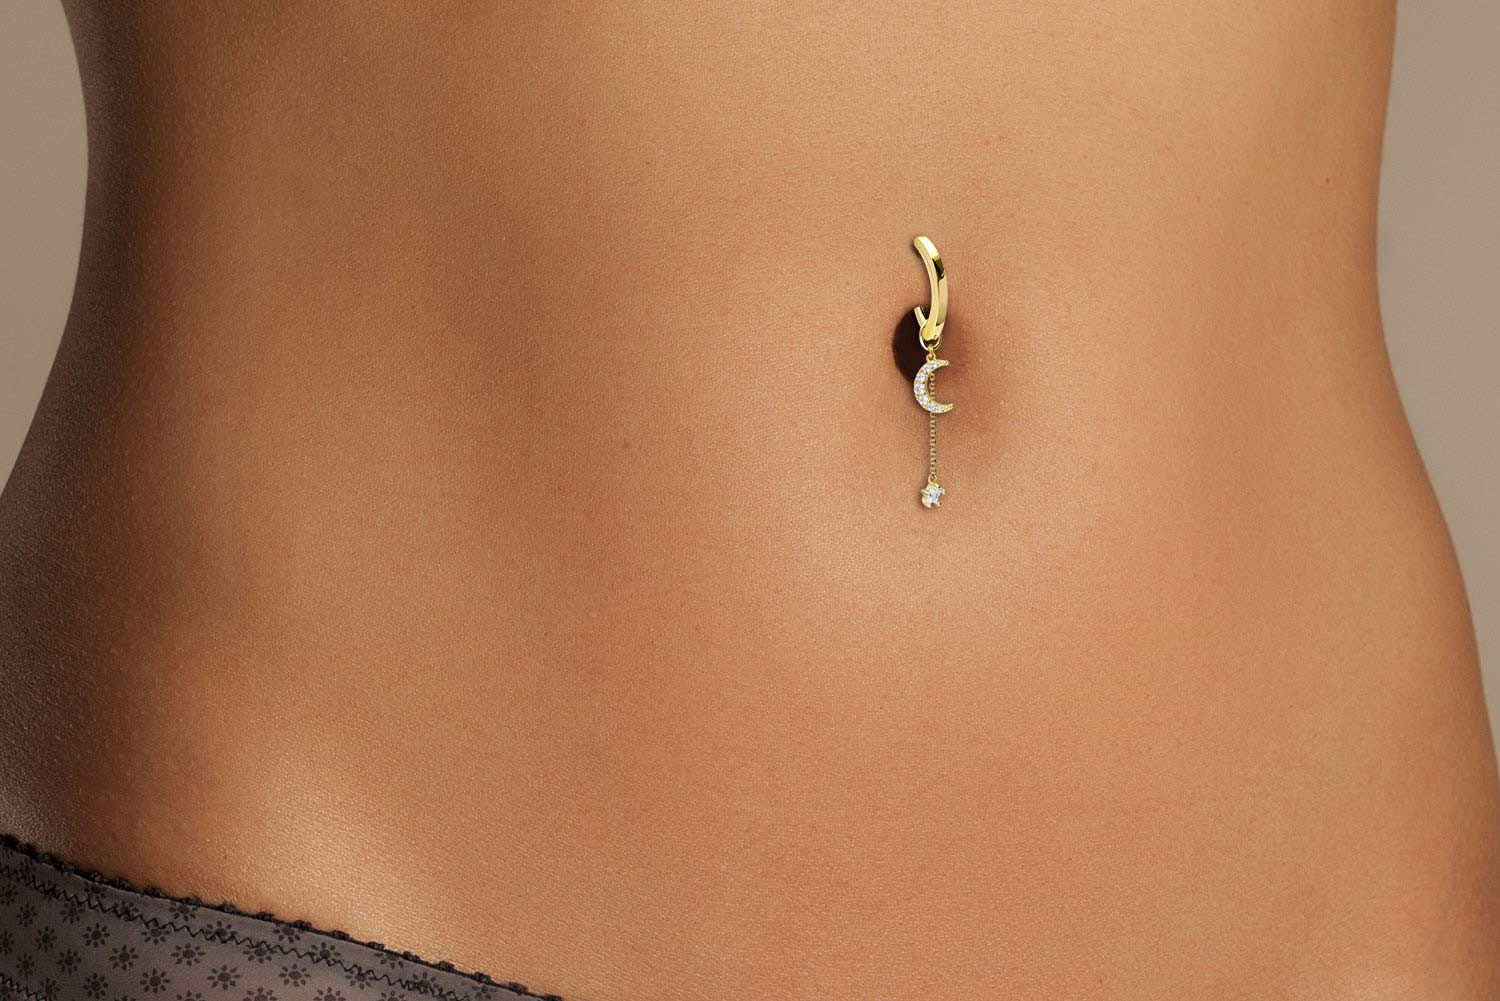 18 carat gold pendant for clickers CRYSTAL MOON + CRYSTAL STAR